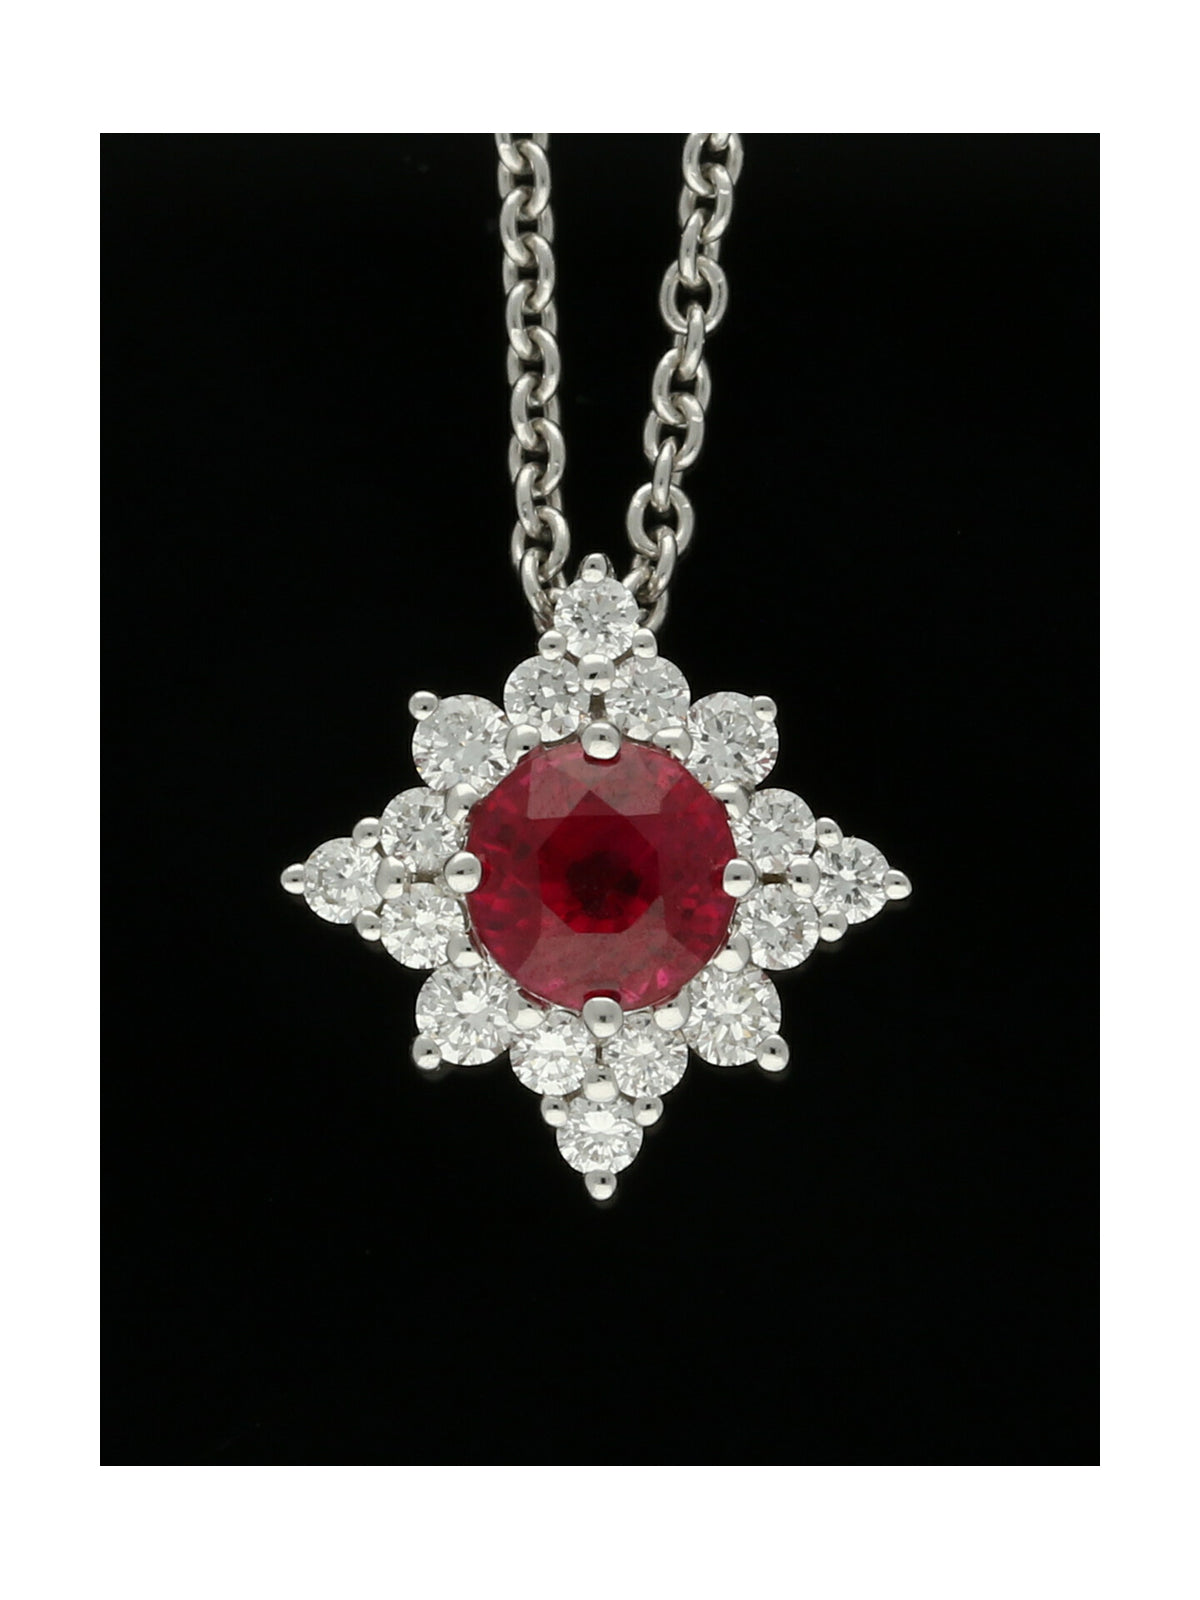 Ruby & Diamond Star Cluster Pendant Necklace in 18ct White Gold